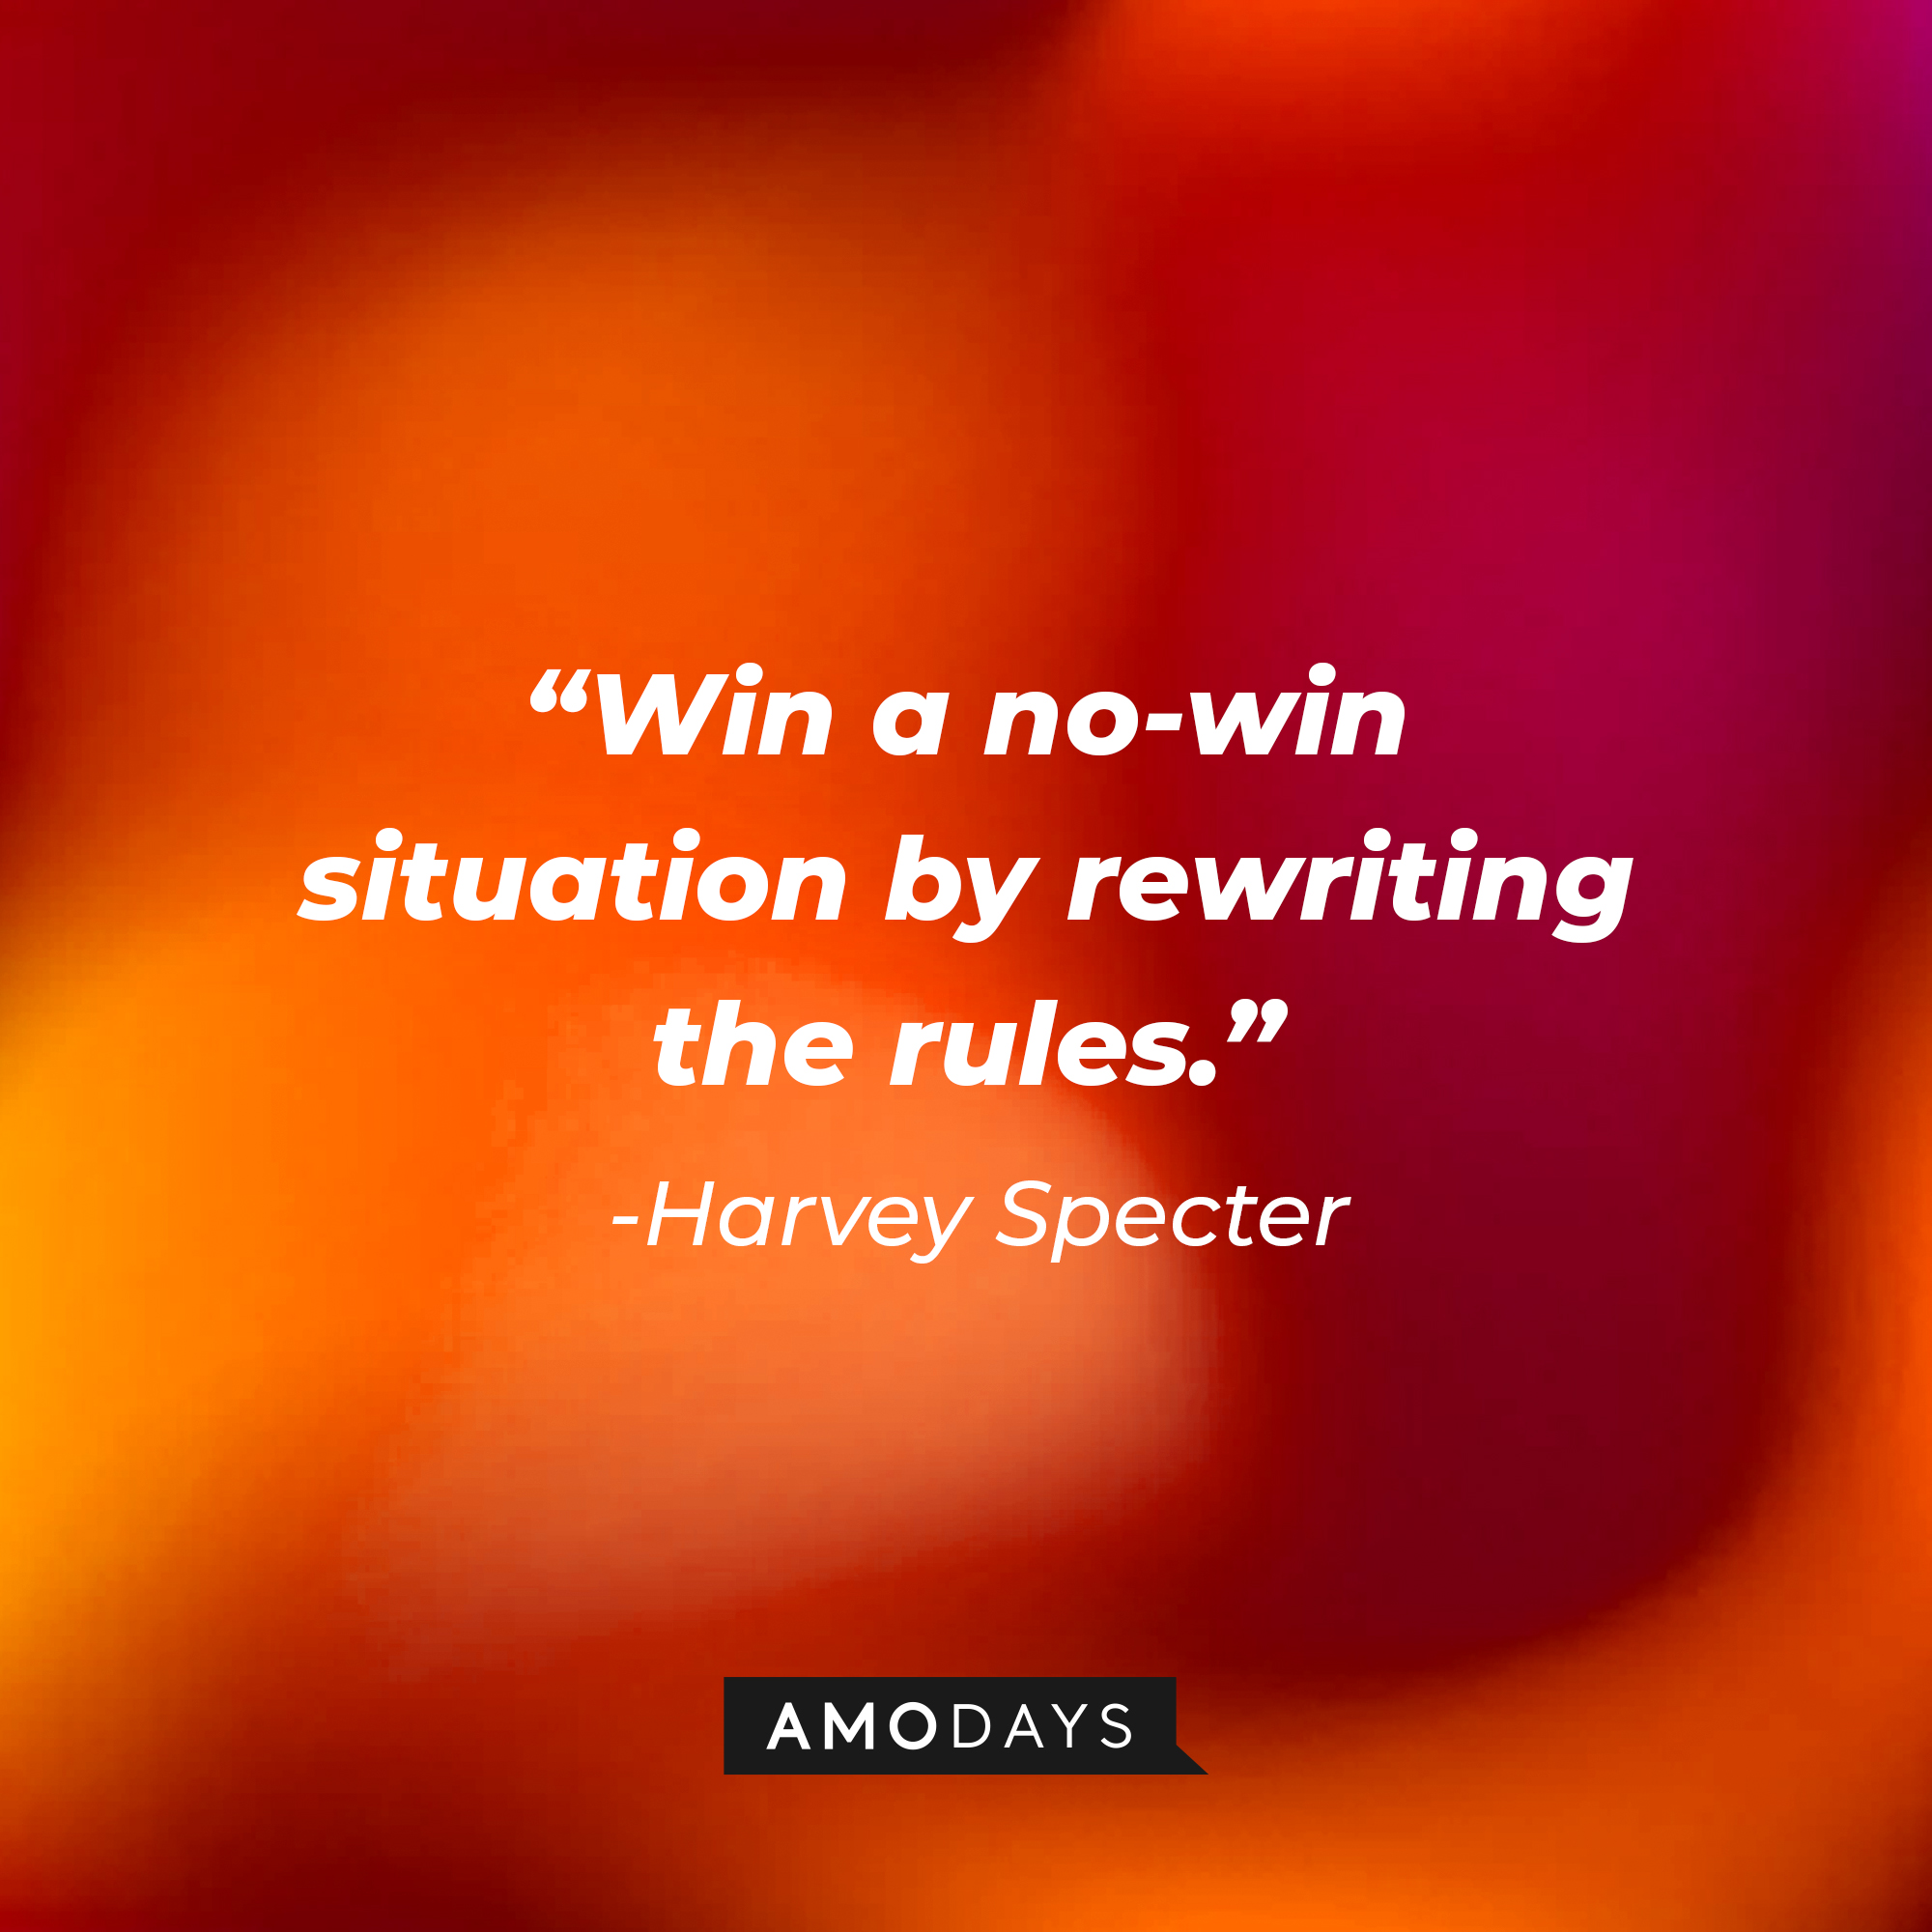 Harvey Specter's quote from "Suits" : "Win a no-win situation by rewriting the rules." | Source: Amodays